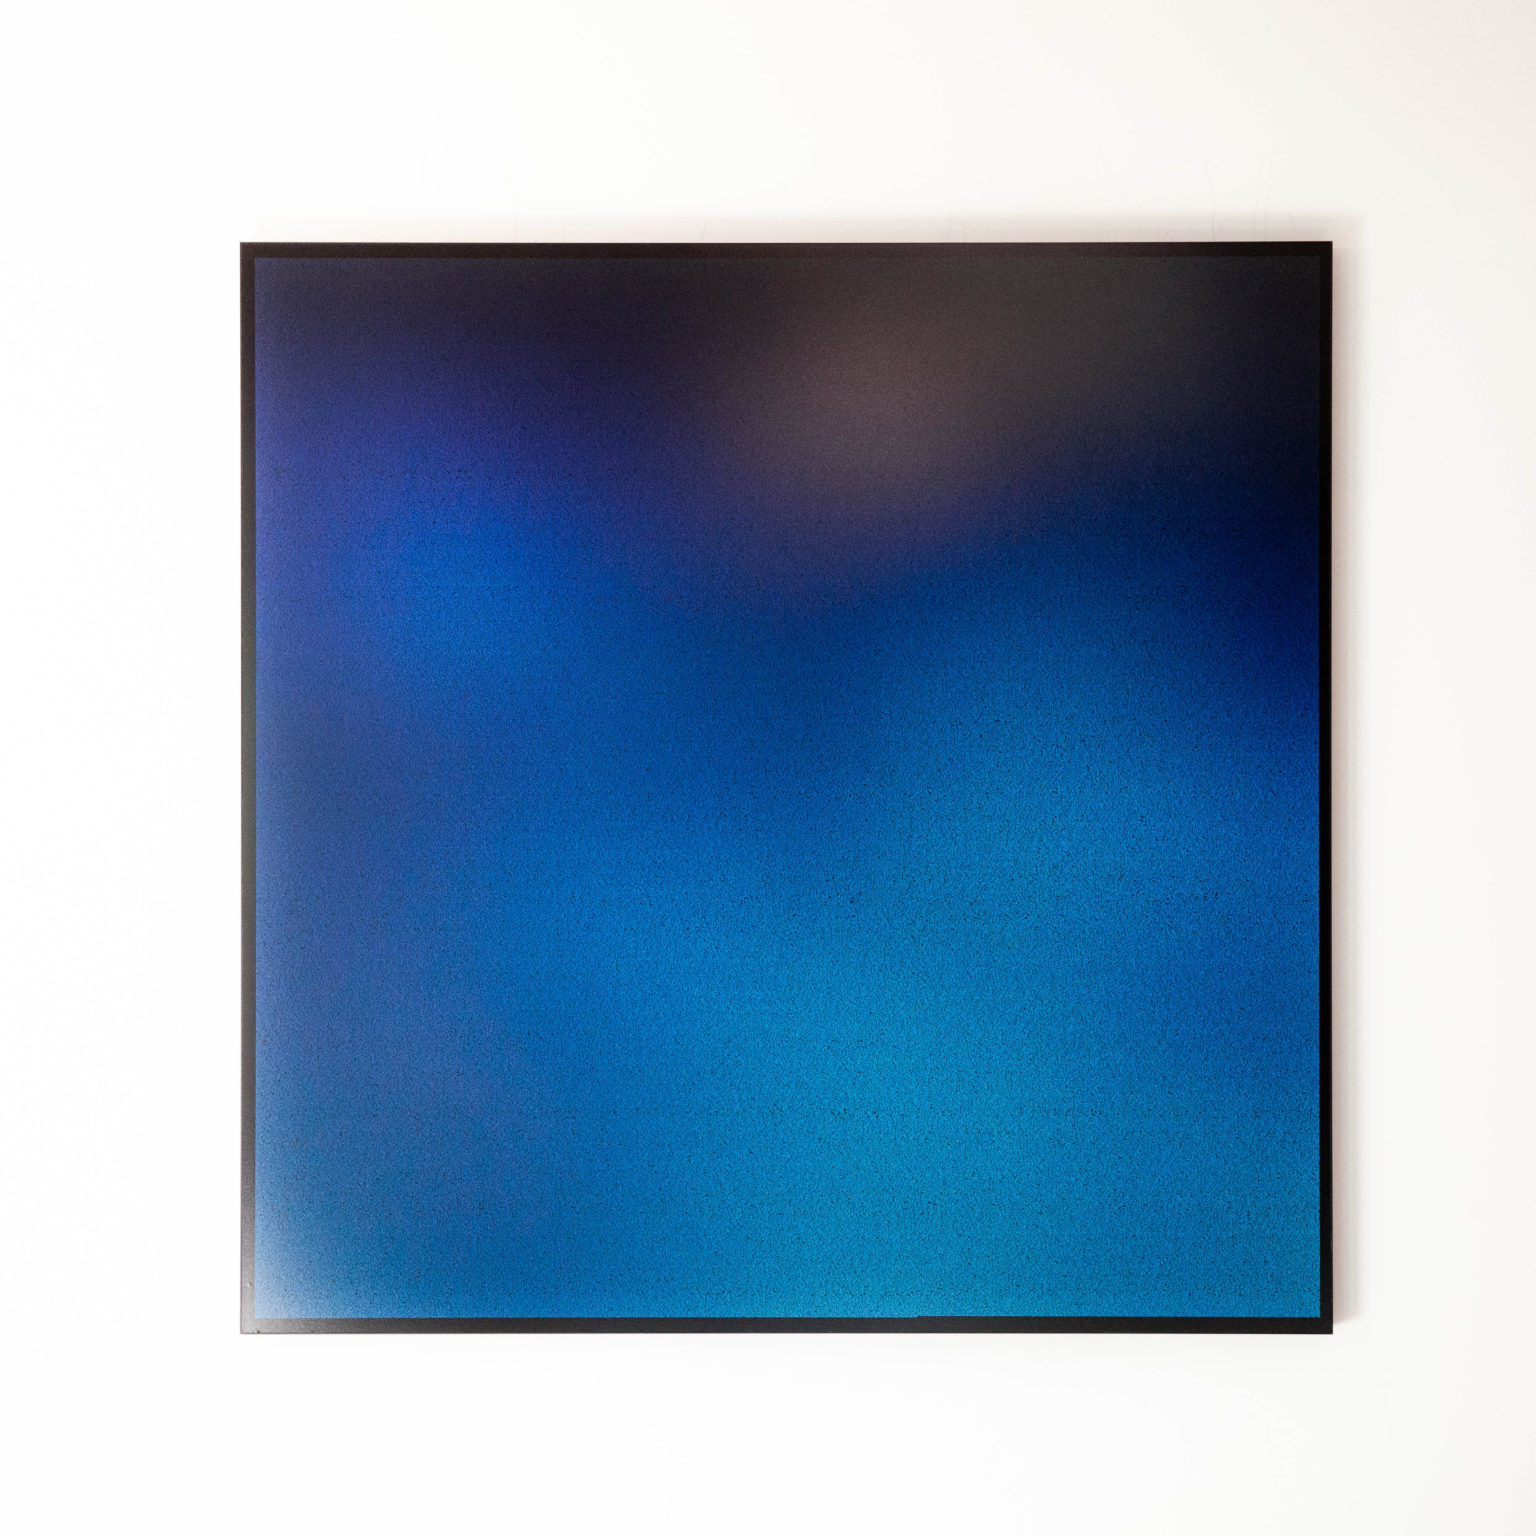 Gregory Valentin, 'Lumiere', an abstract painting fading from black at the top to lighter blue. 